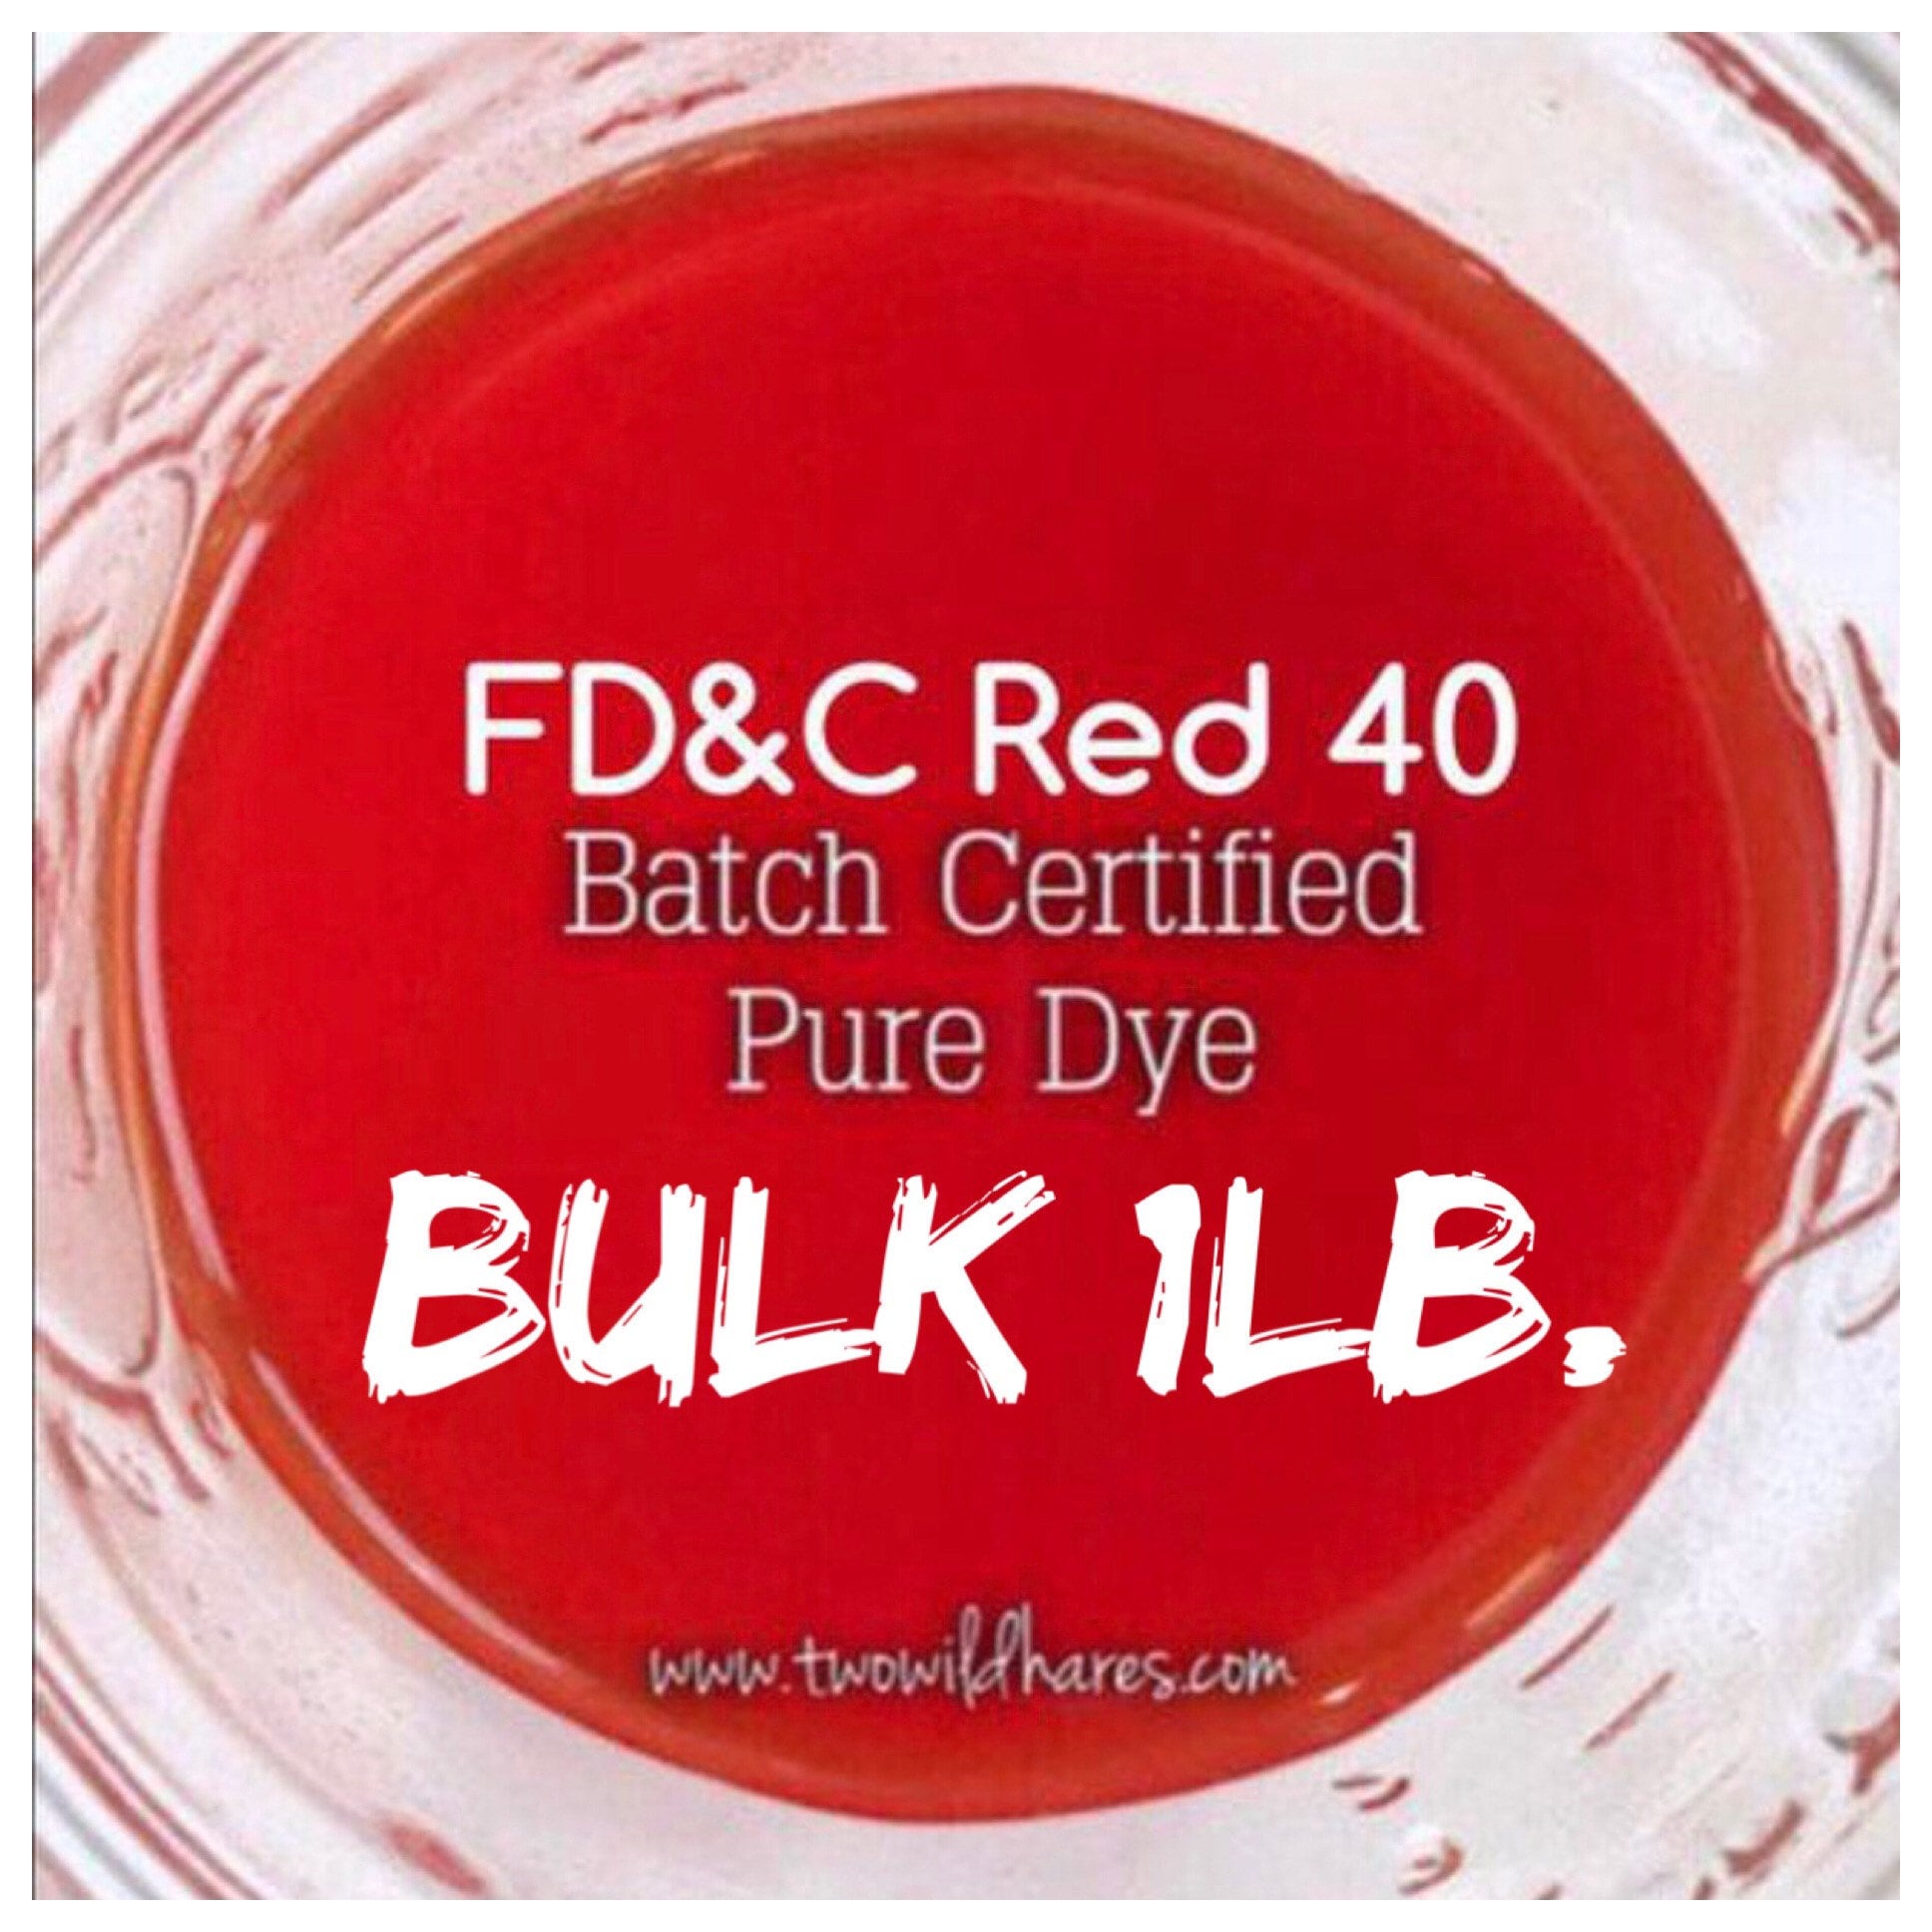 1lb Bulk BLOOD ORANGE Bath Bomb DYE, Fd&c Red 40, 89-94%, Batch Certified,  Powdered Water Soluble Colorant, Two Wild Hares